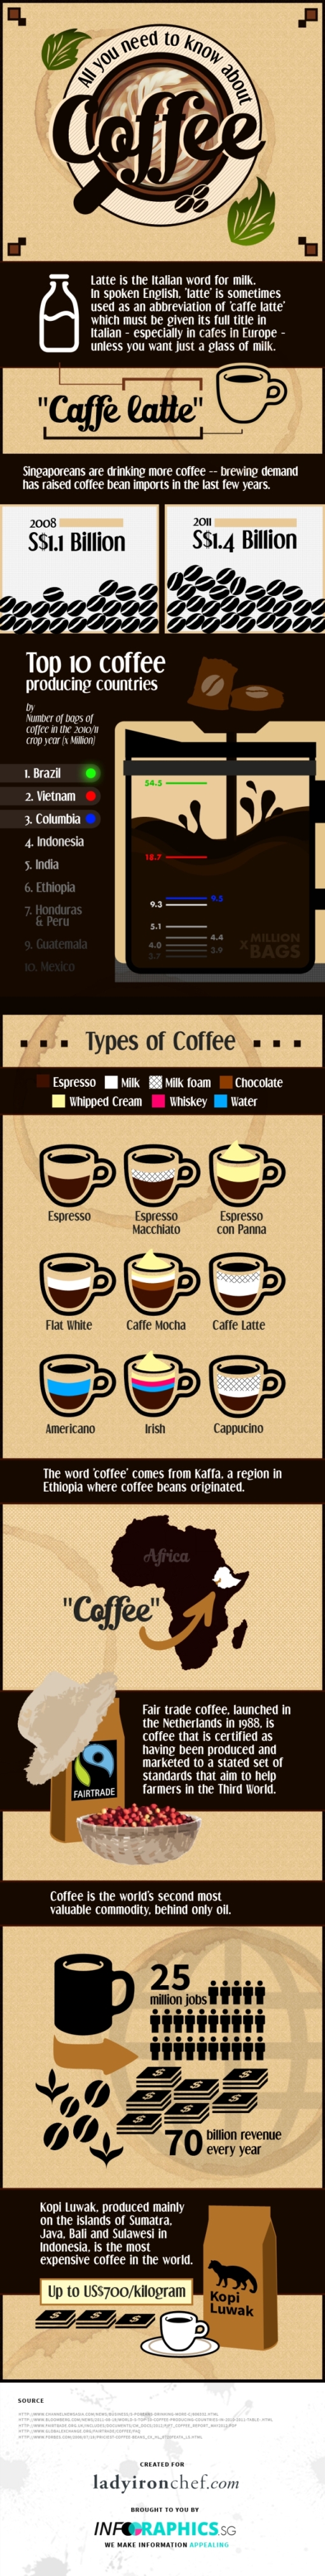 All you need to know about coffee